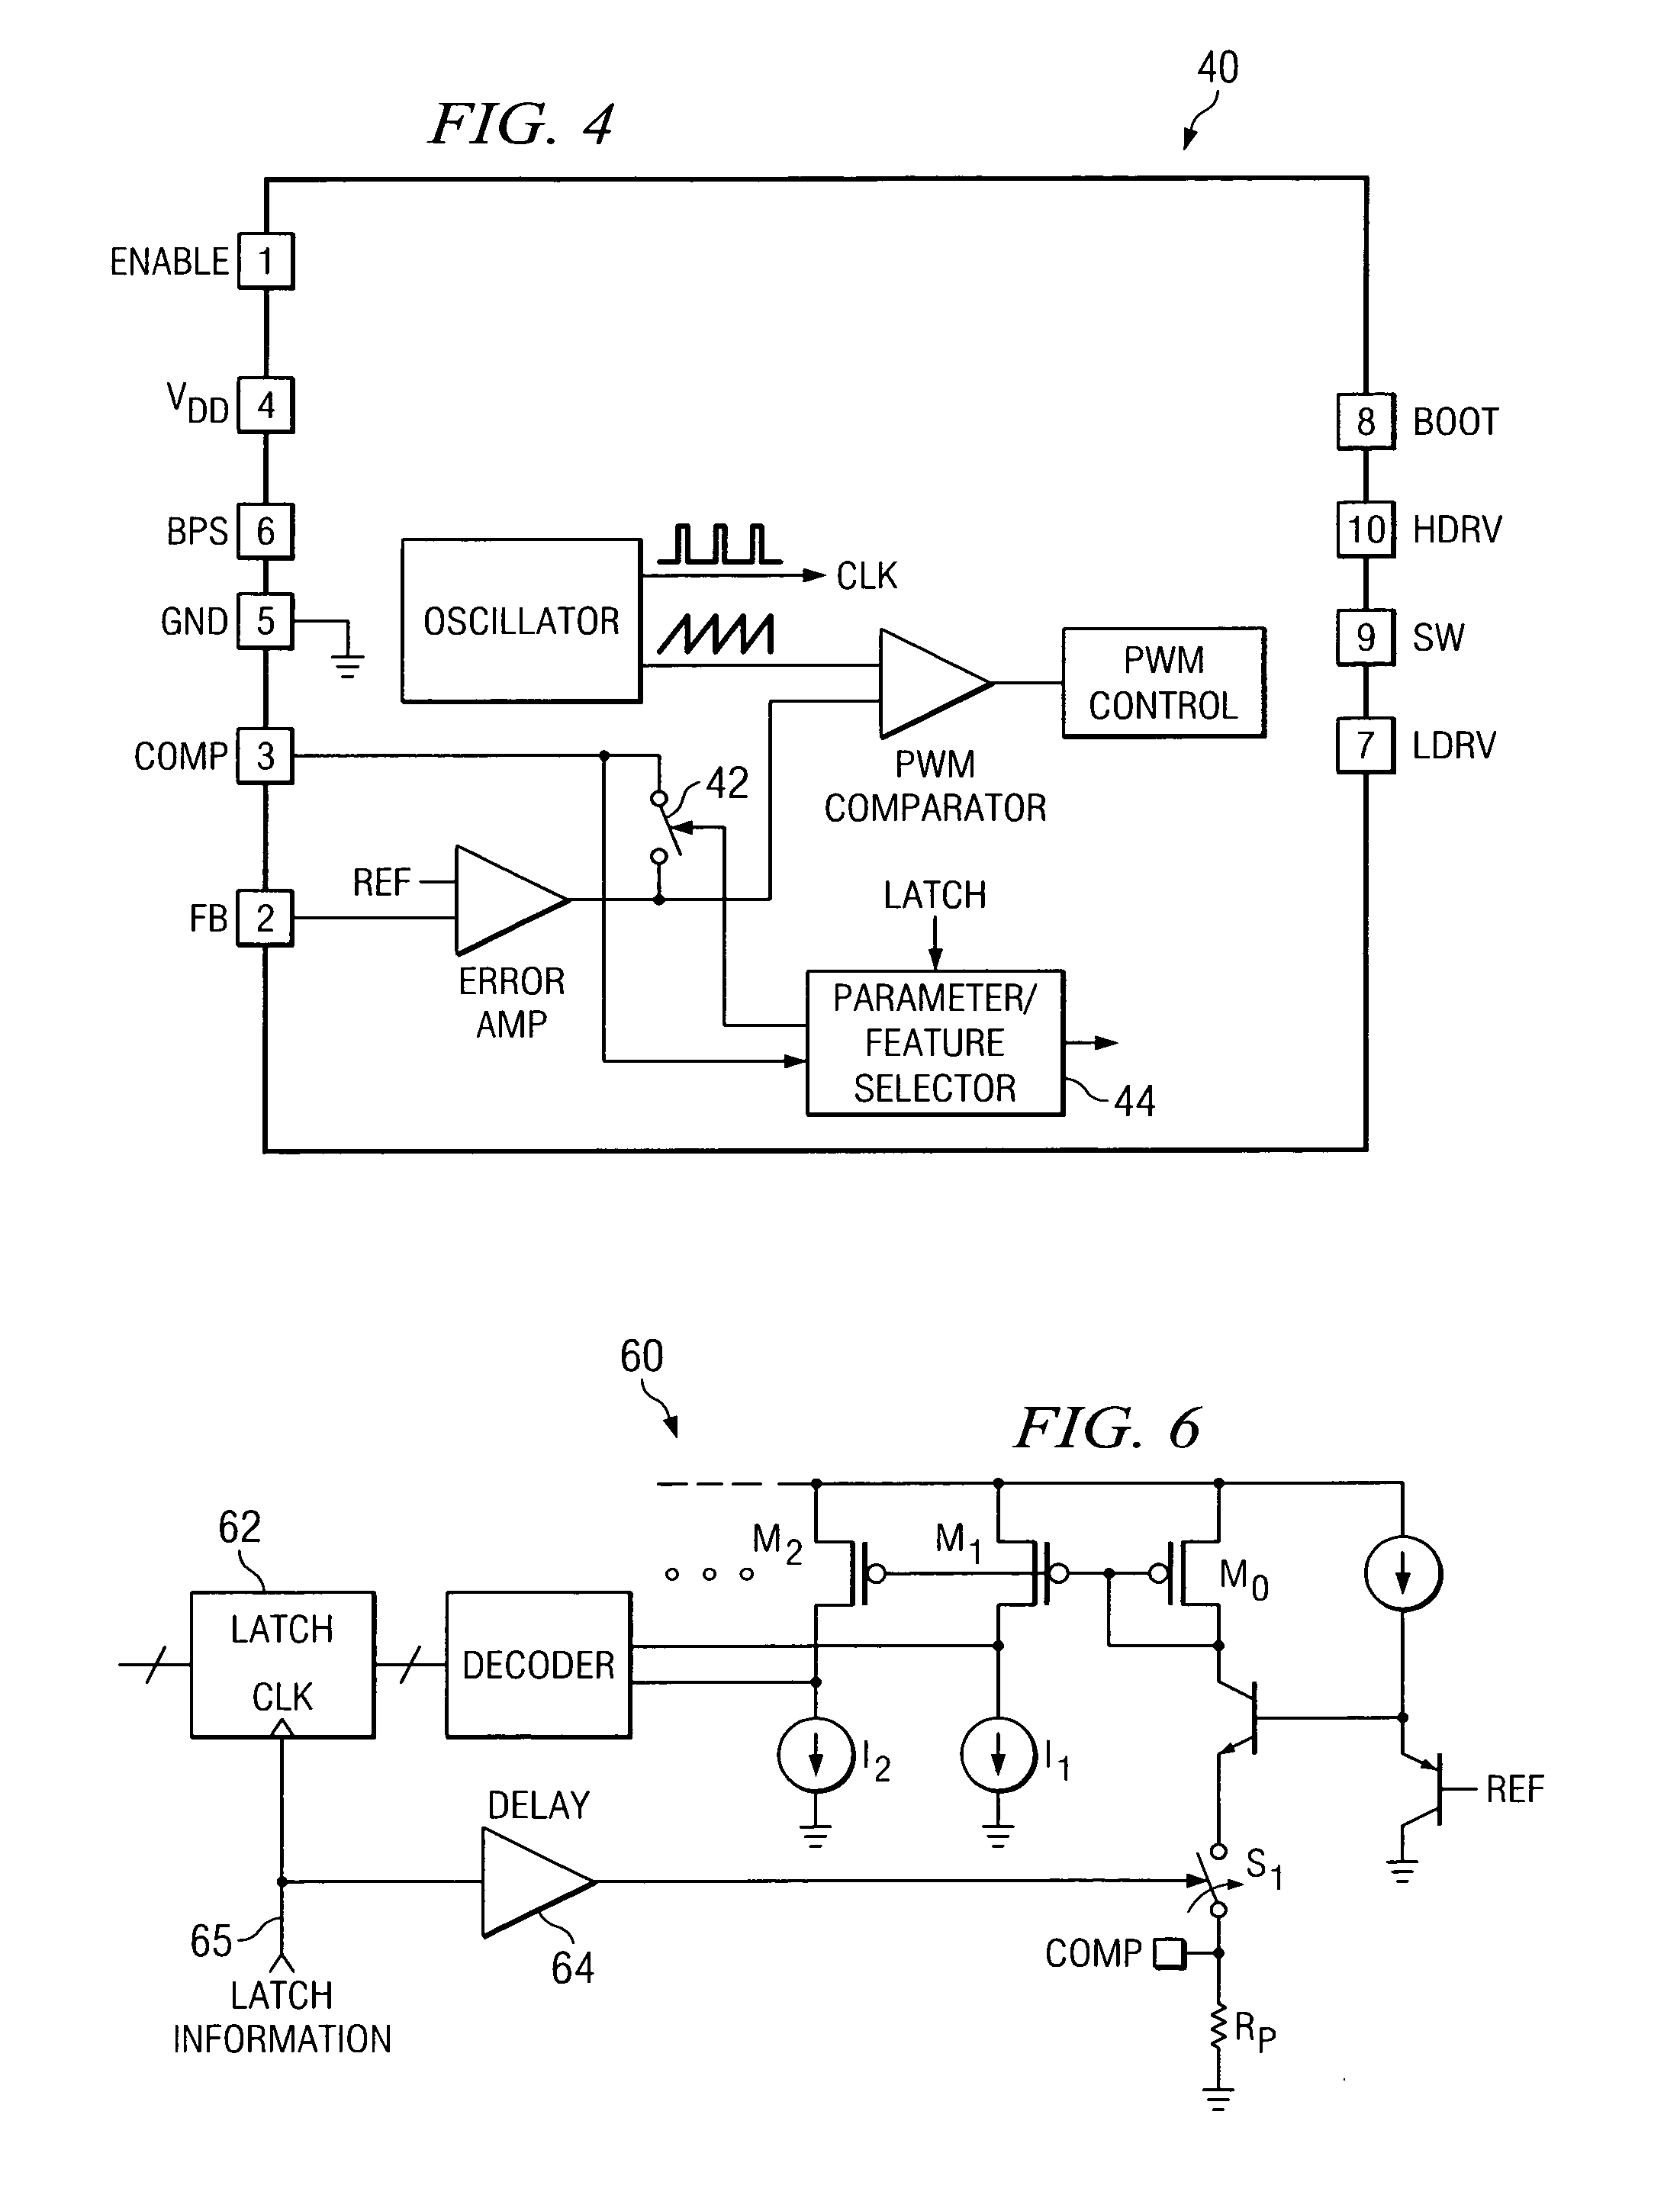 System and method for programming an internal parameter or feature in a power converter with a multi-function connector